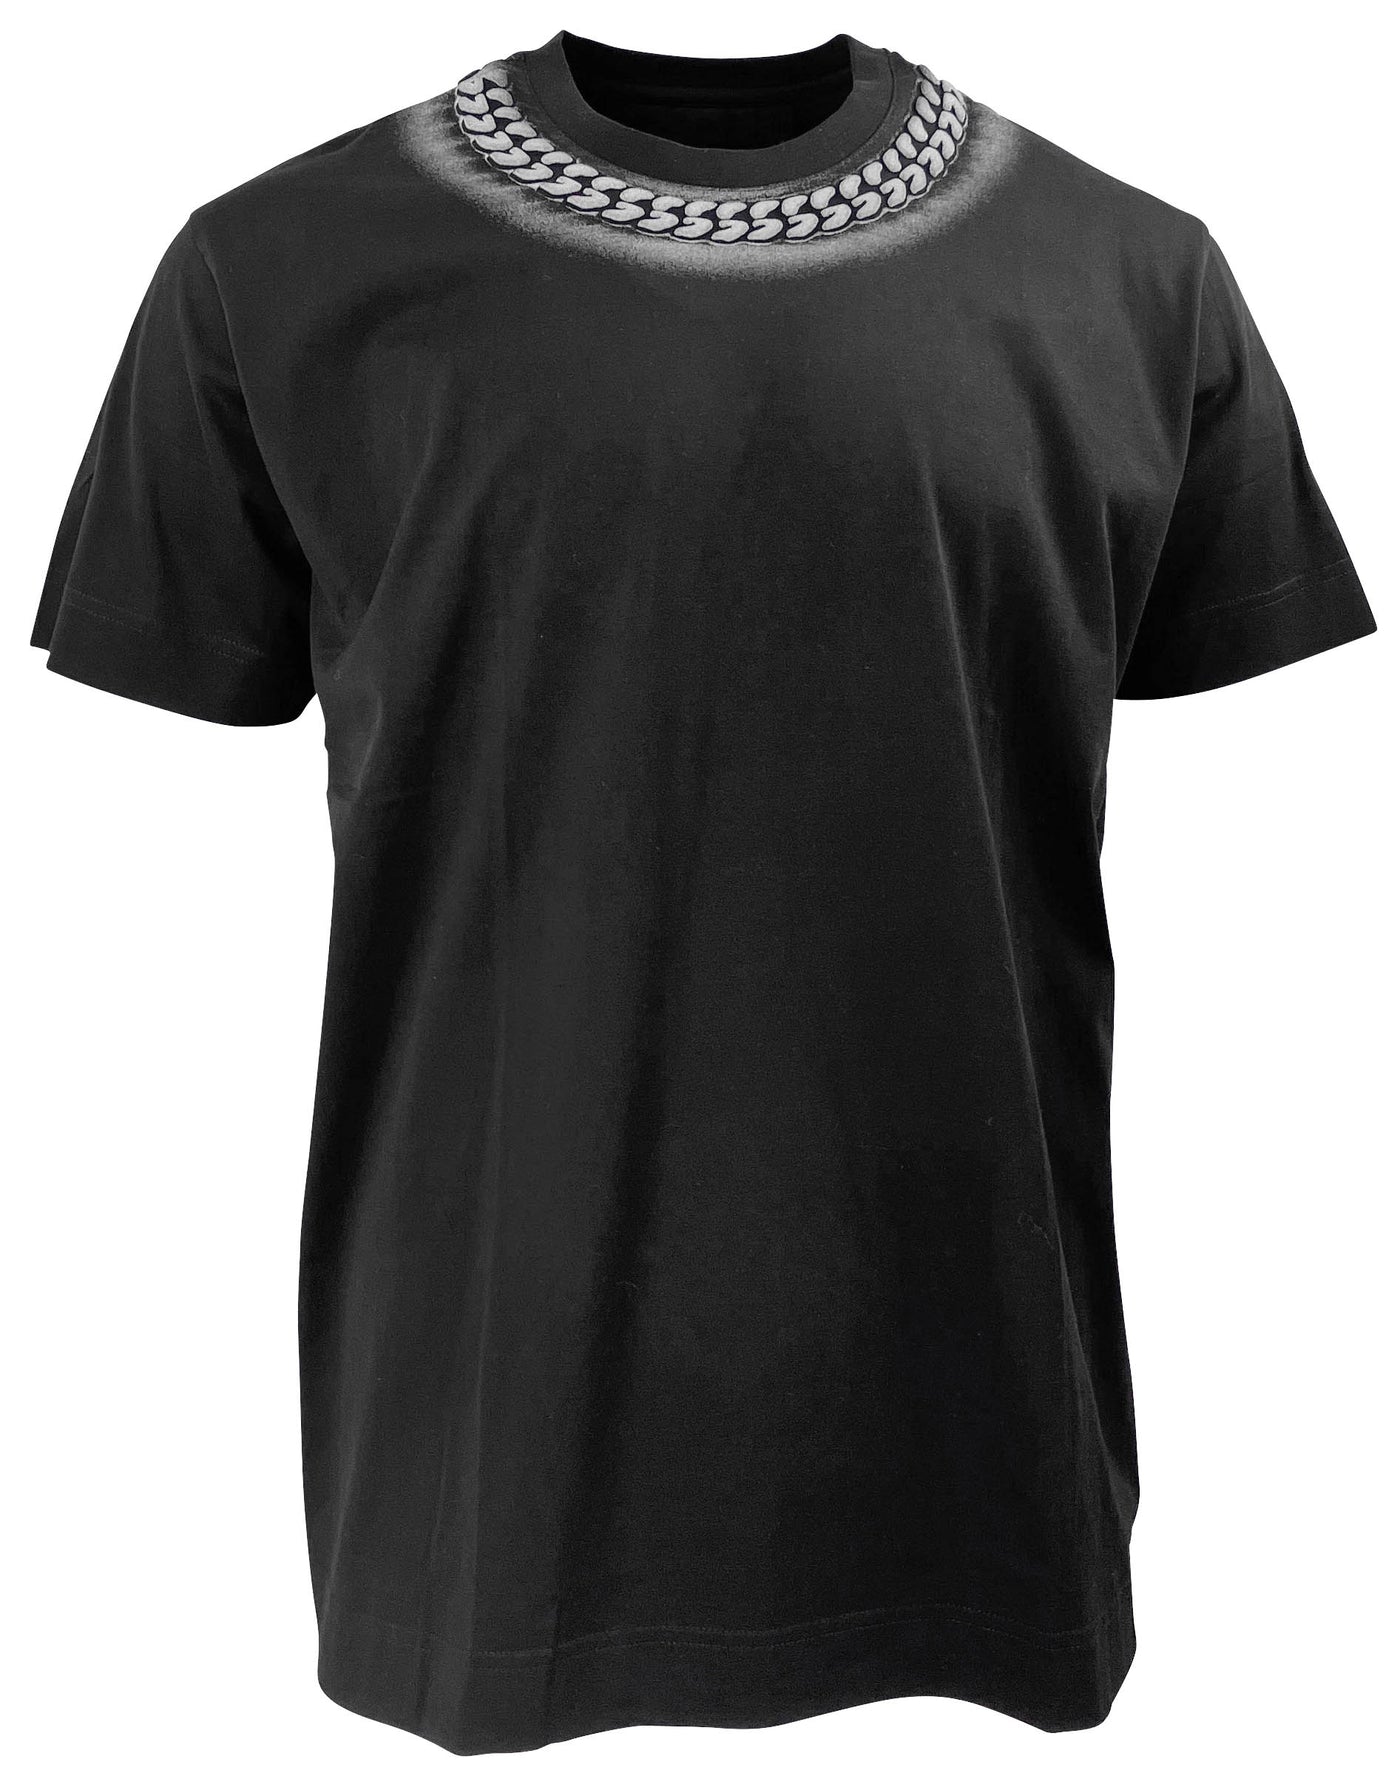 Givenchy Spray Neck Tee in Black - Discounts on Givenchy at UAL